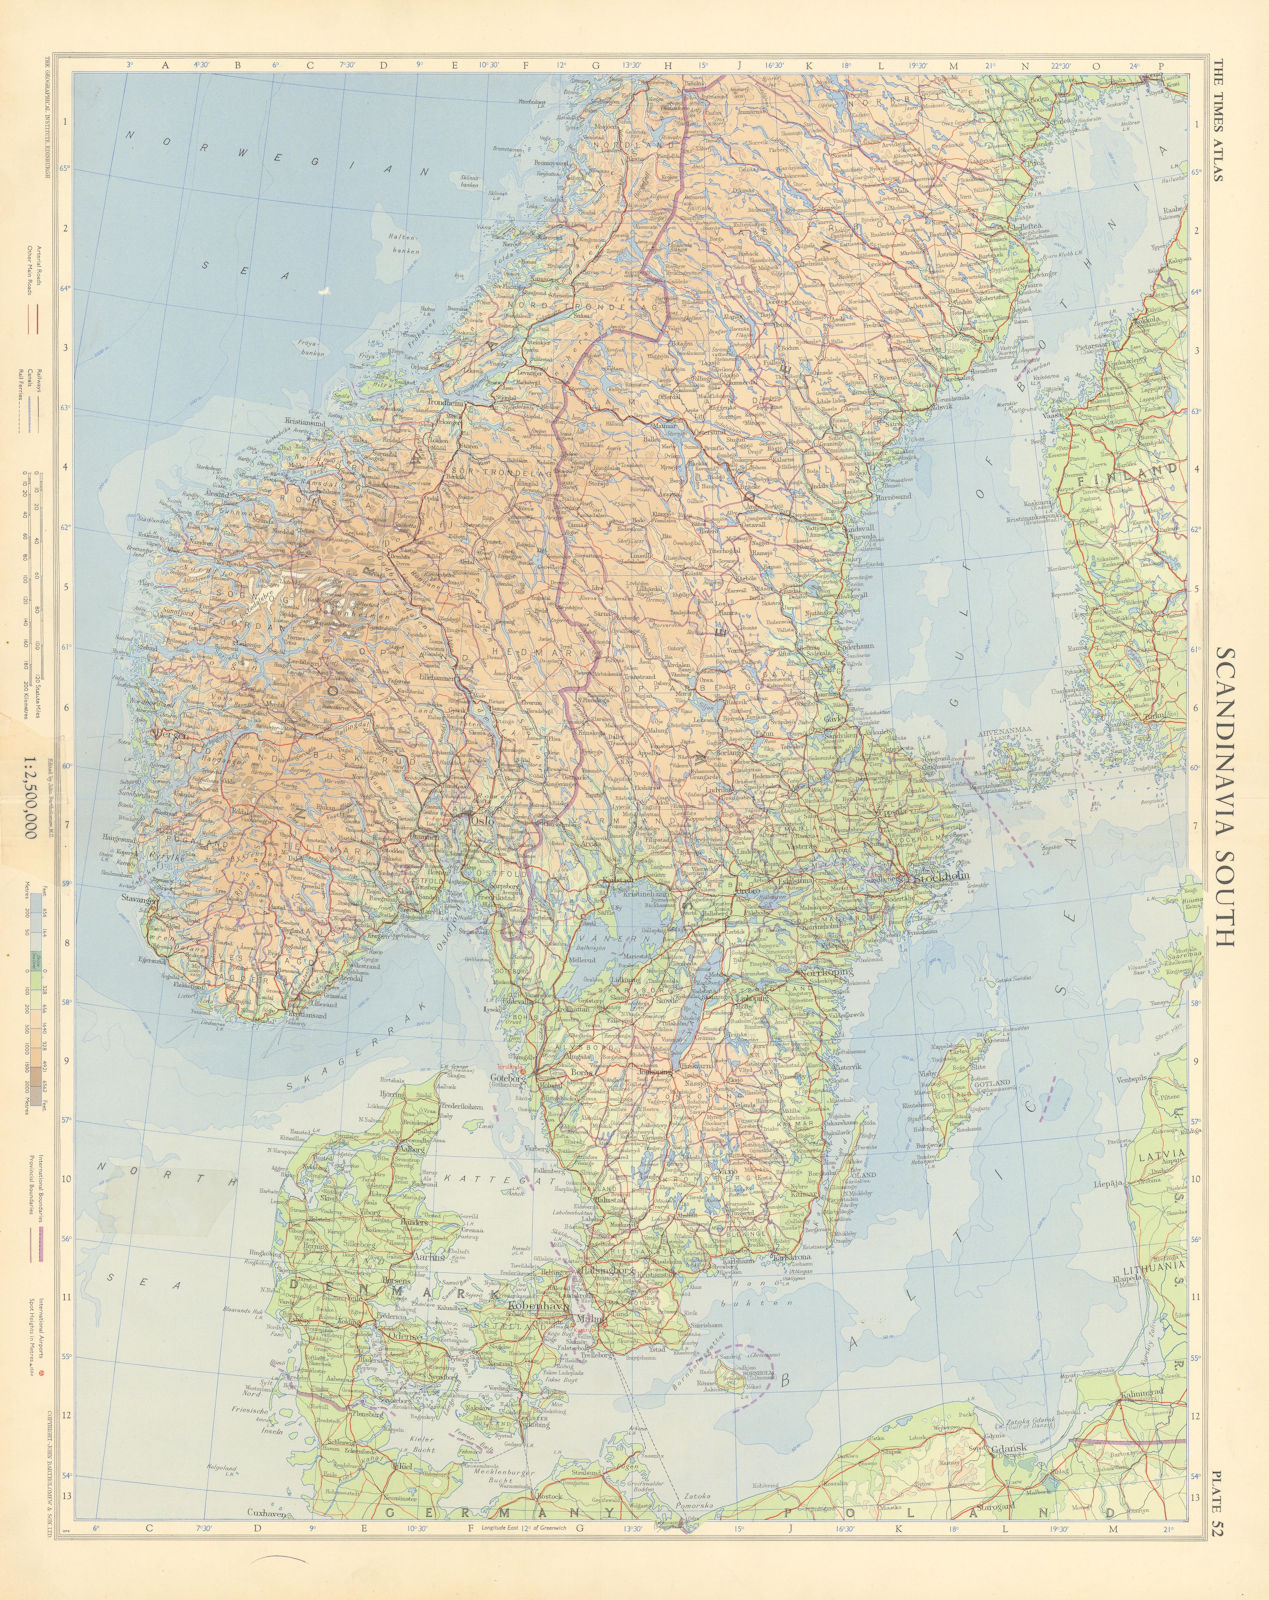 Southern Scandinavia. Norway Sweden Denmark. TIMES 1955 old vintage map chart